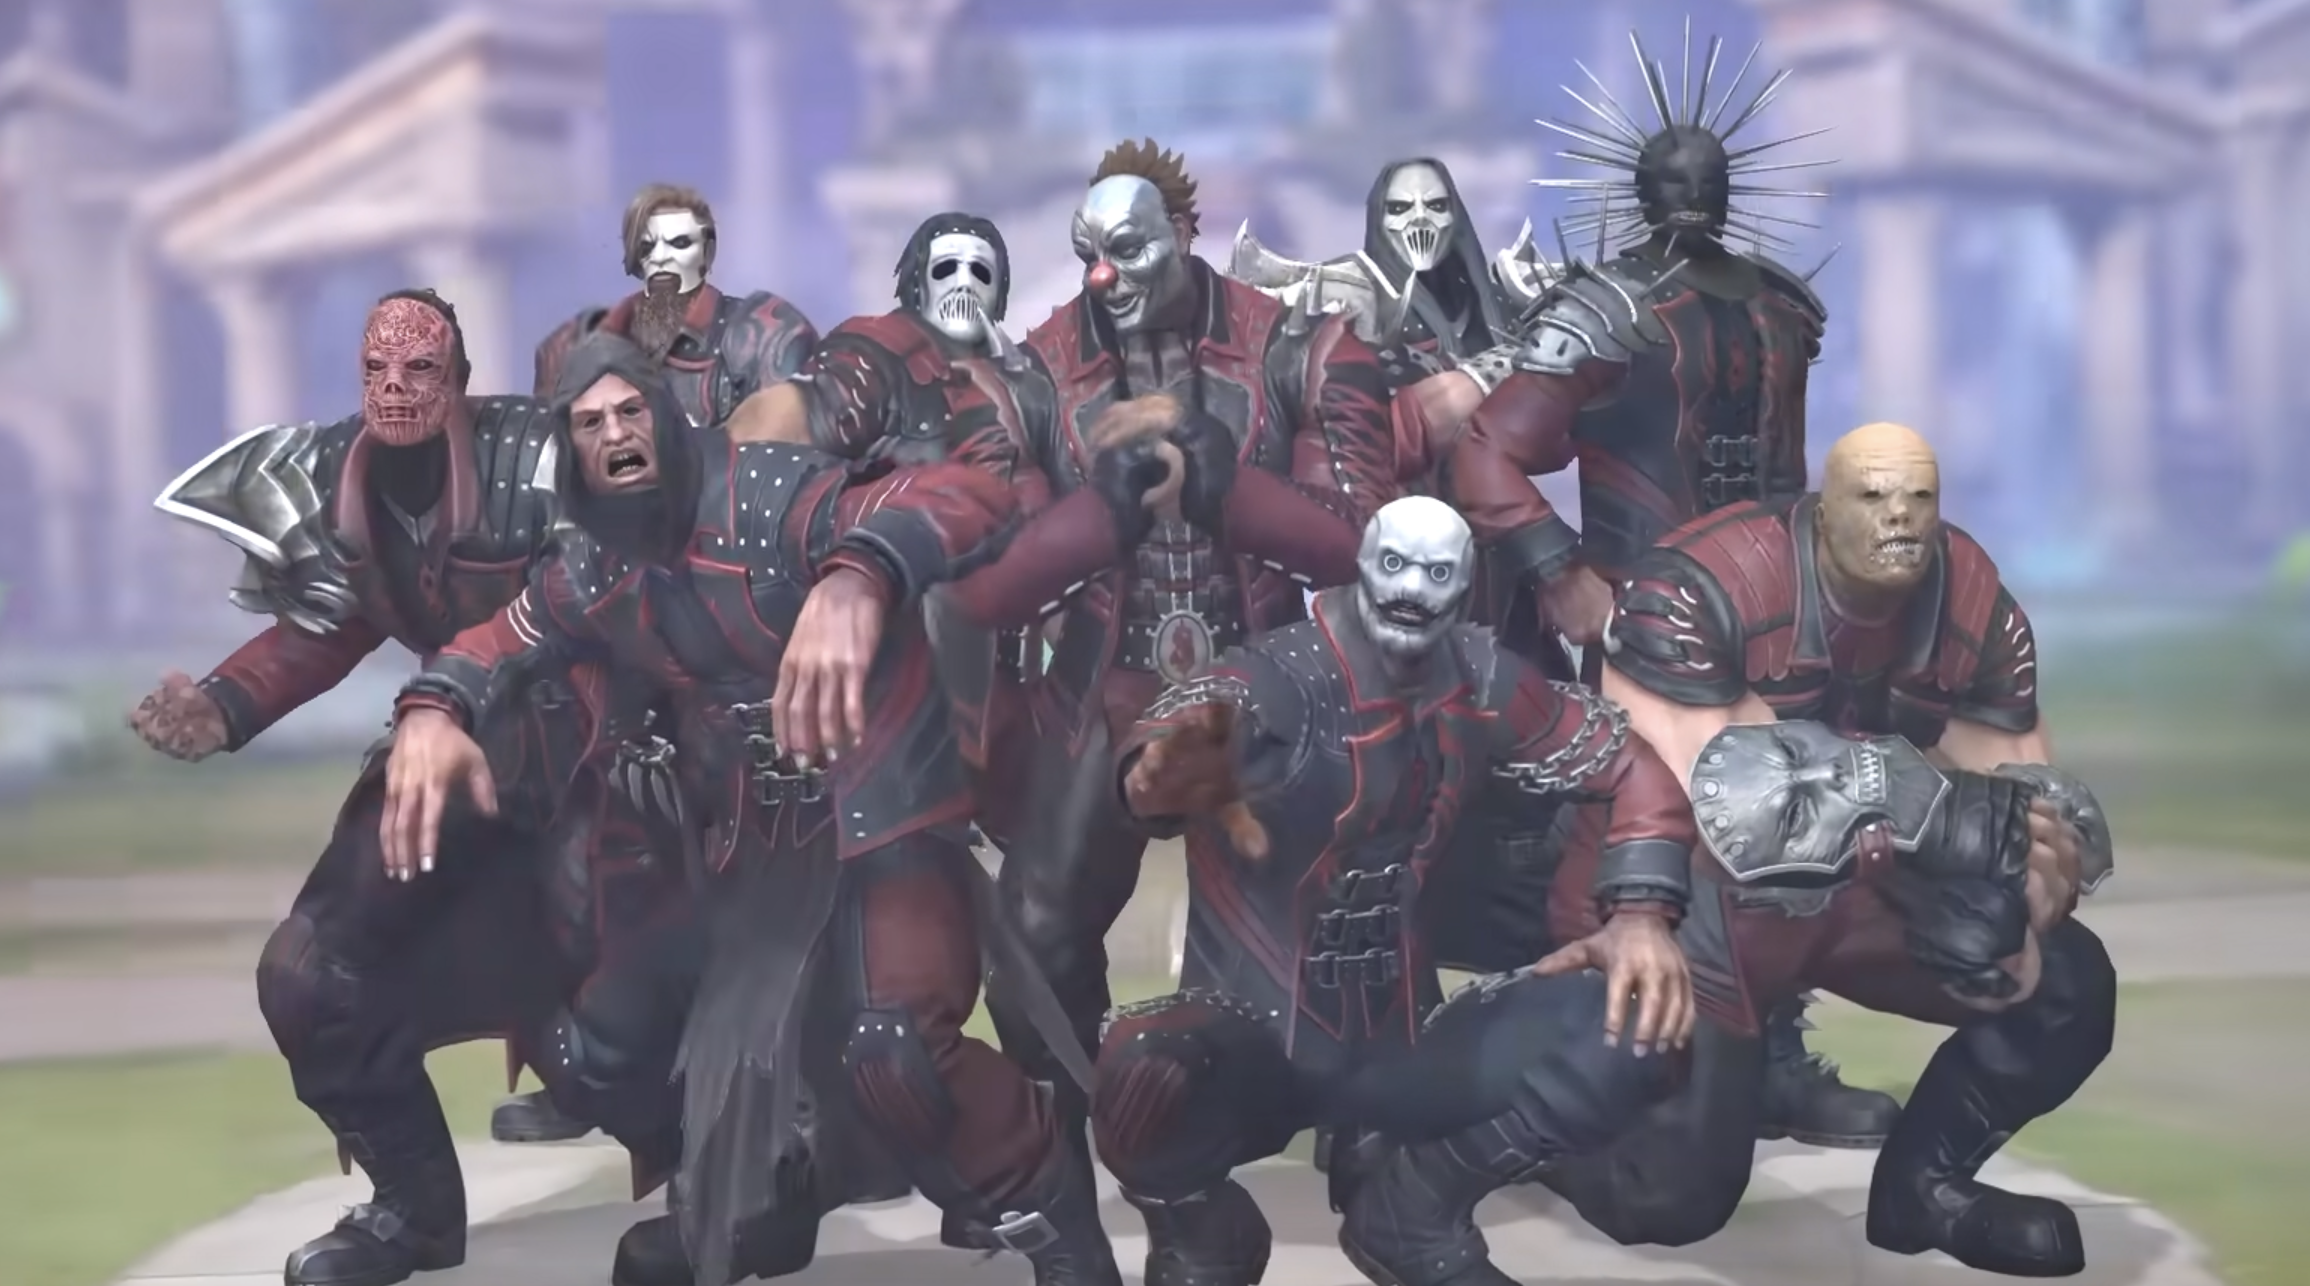 SLIPKNOT Are Now Playable Characters In Smite Video Game